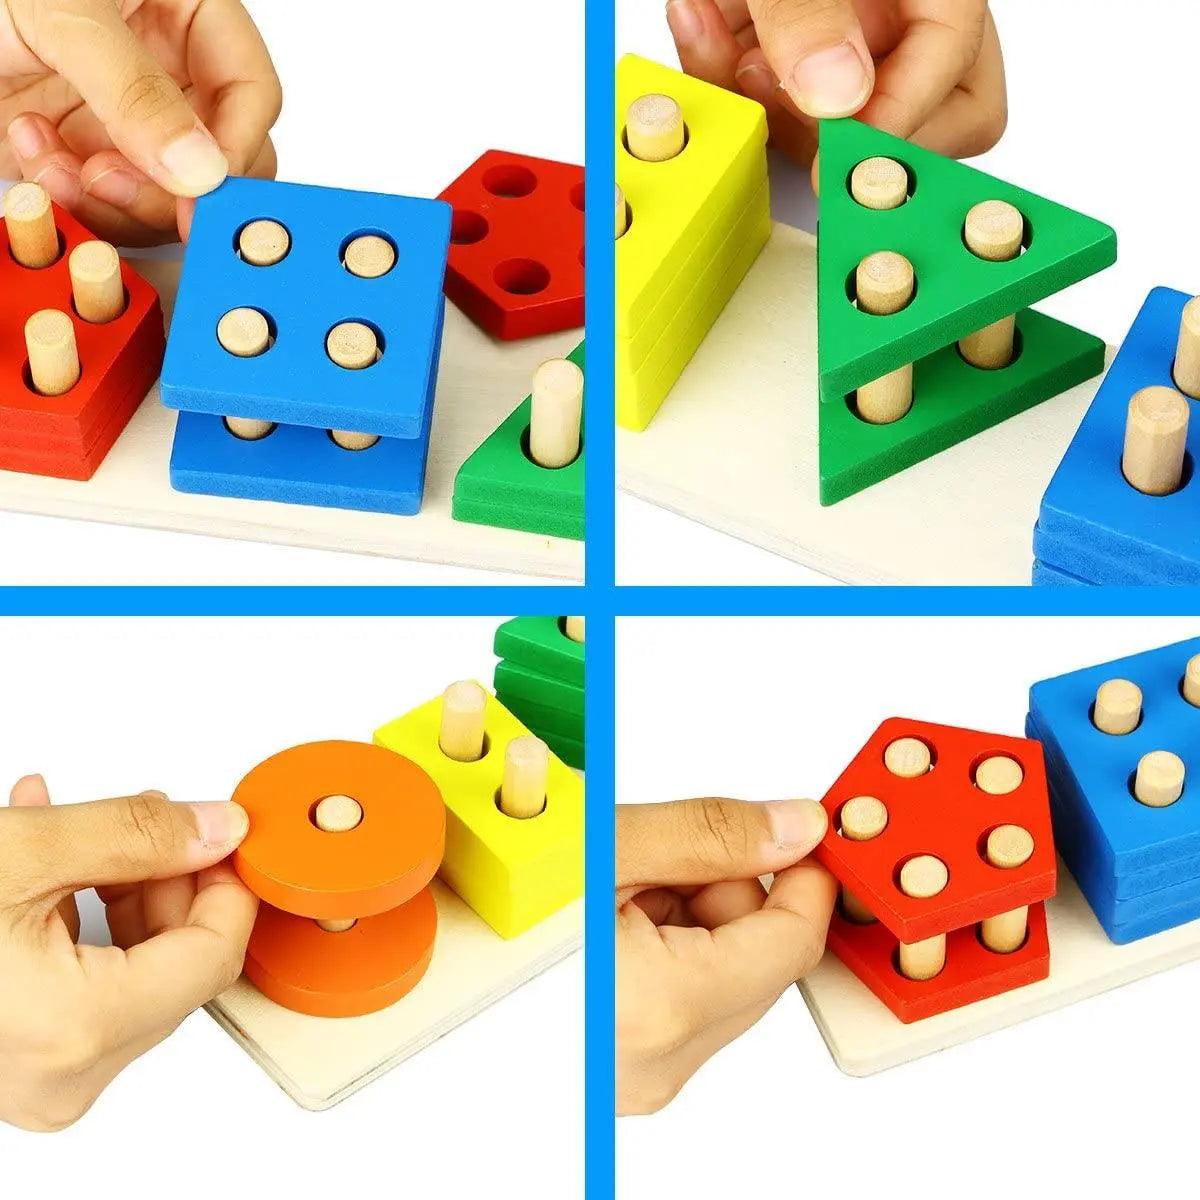 Wooden Educational Toys, Wooden Shape Color Sorting Preschool Stacking Blocks The Stationers